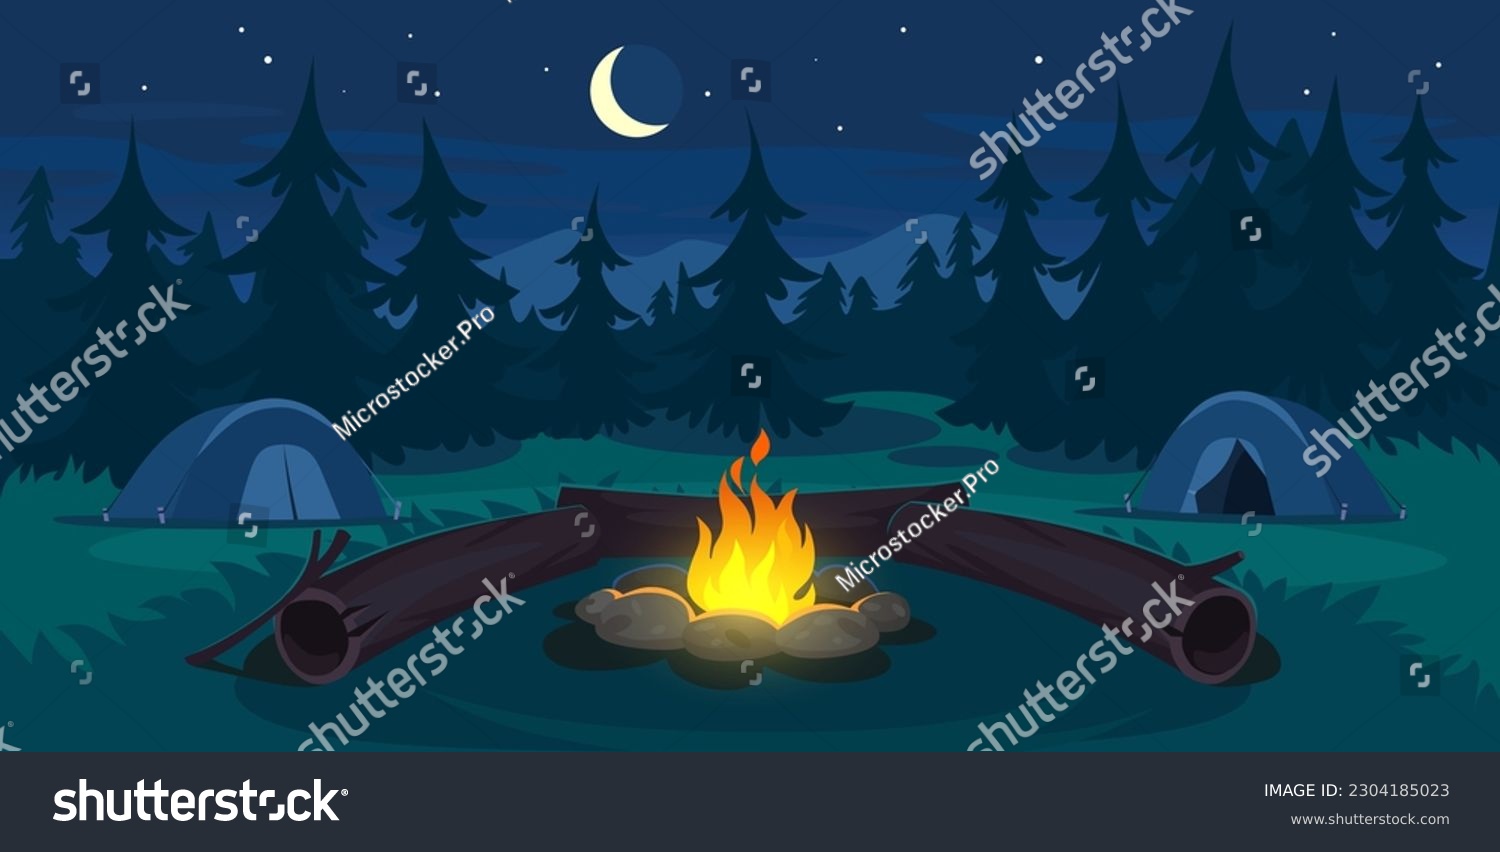 SVG of Night camp in a forest with tents, campfire and log near it. Landscape view on a campsite in the mountains. Summer outdoor vacation. Camping background for game design. Cartoon vector illustration. svg